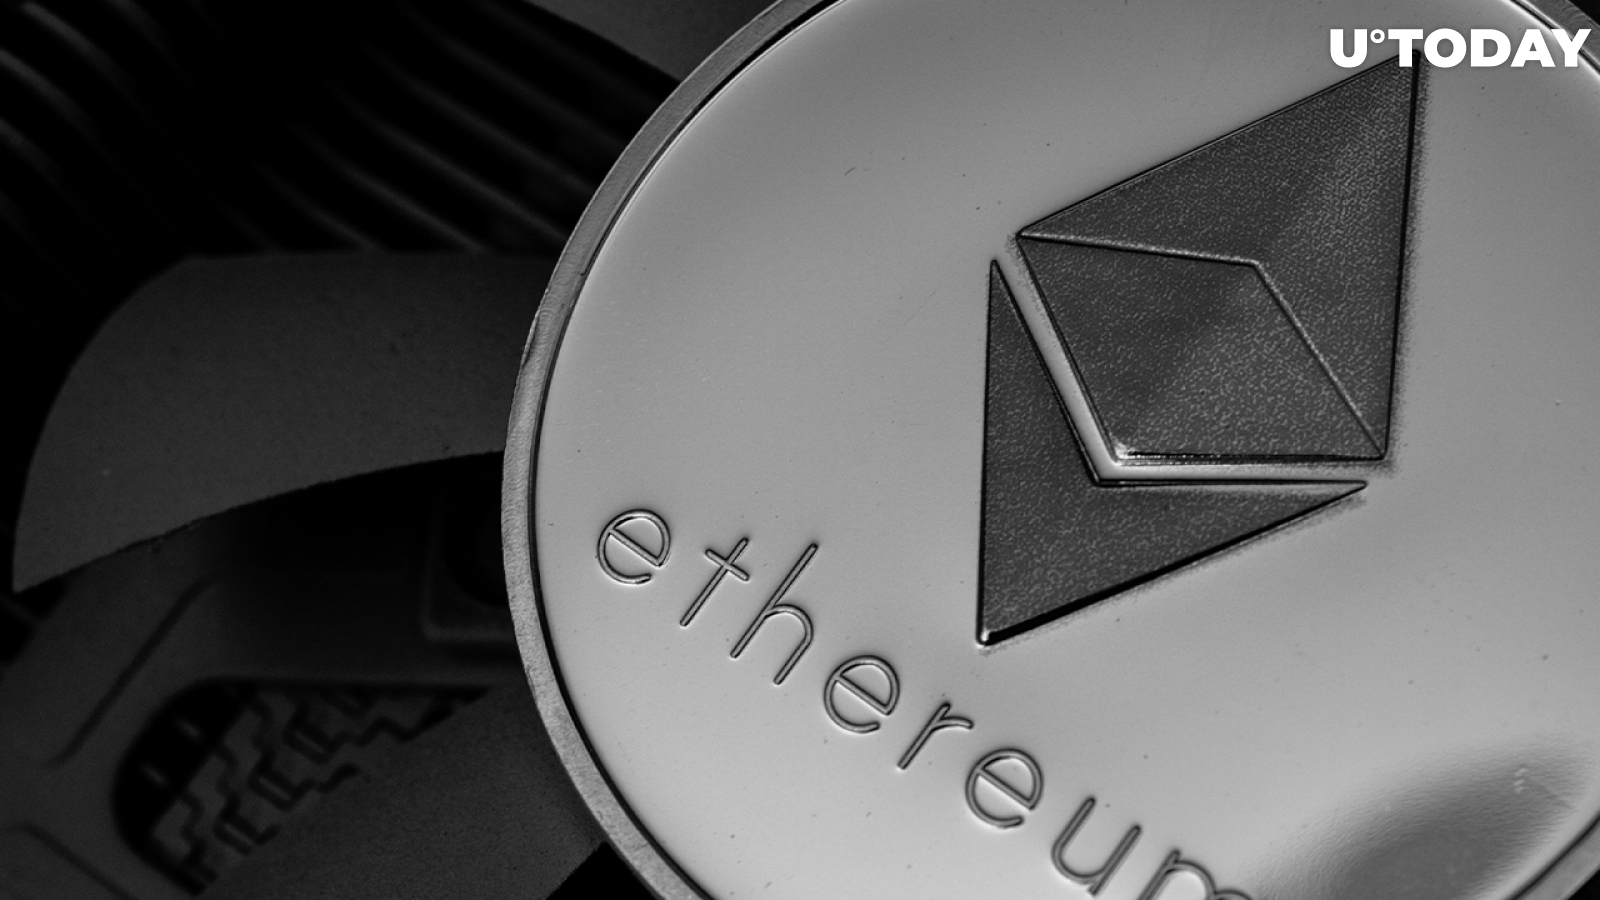 Ethereum's L2s at Historic Lows: Analyst